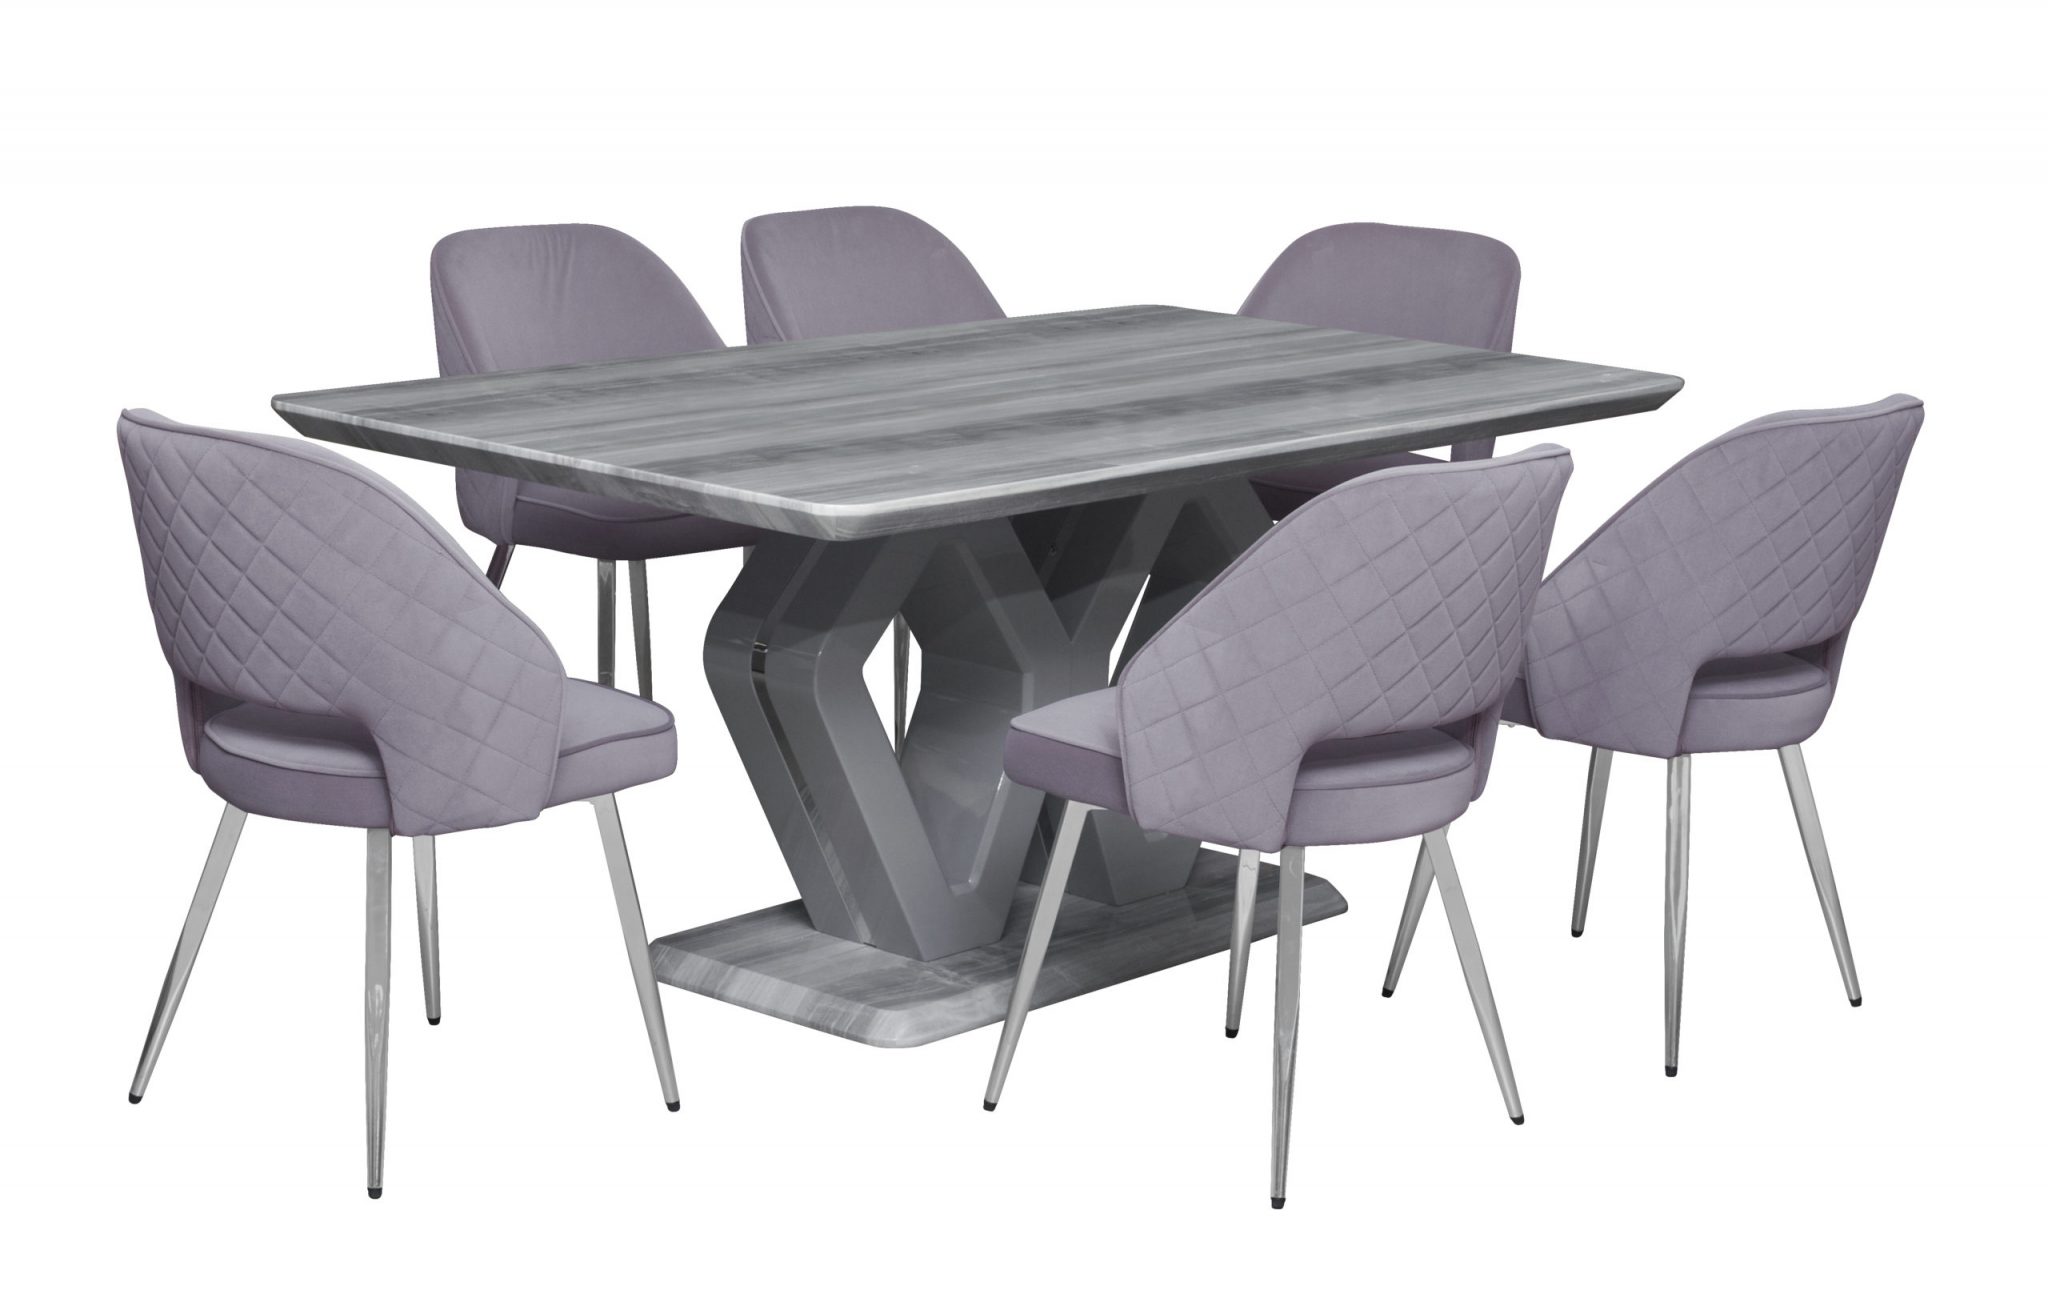 Diana dining room suite - United Furniture Outlets